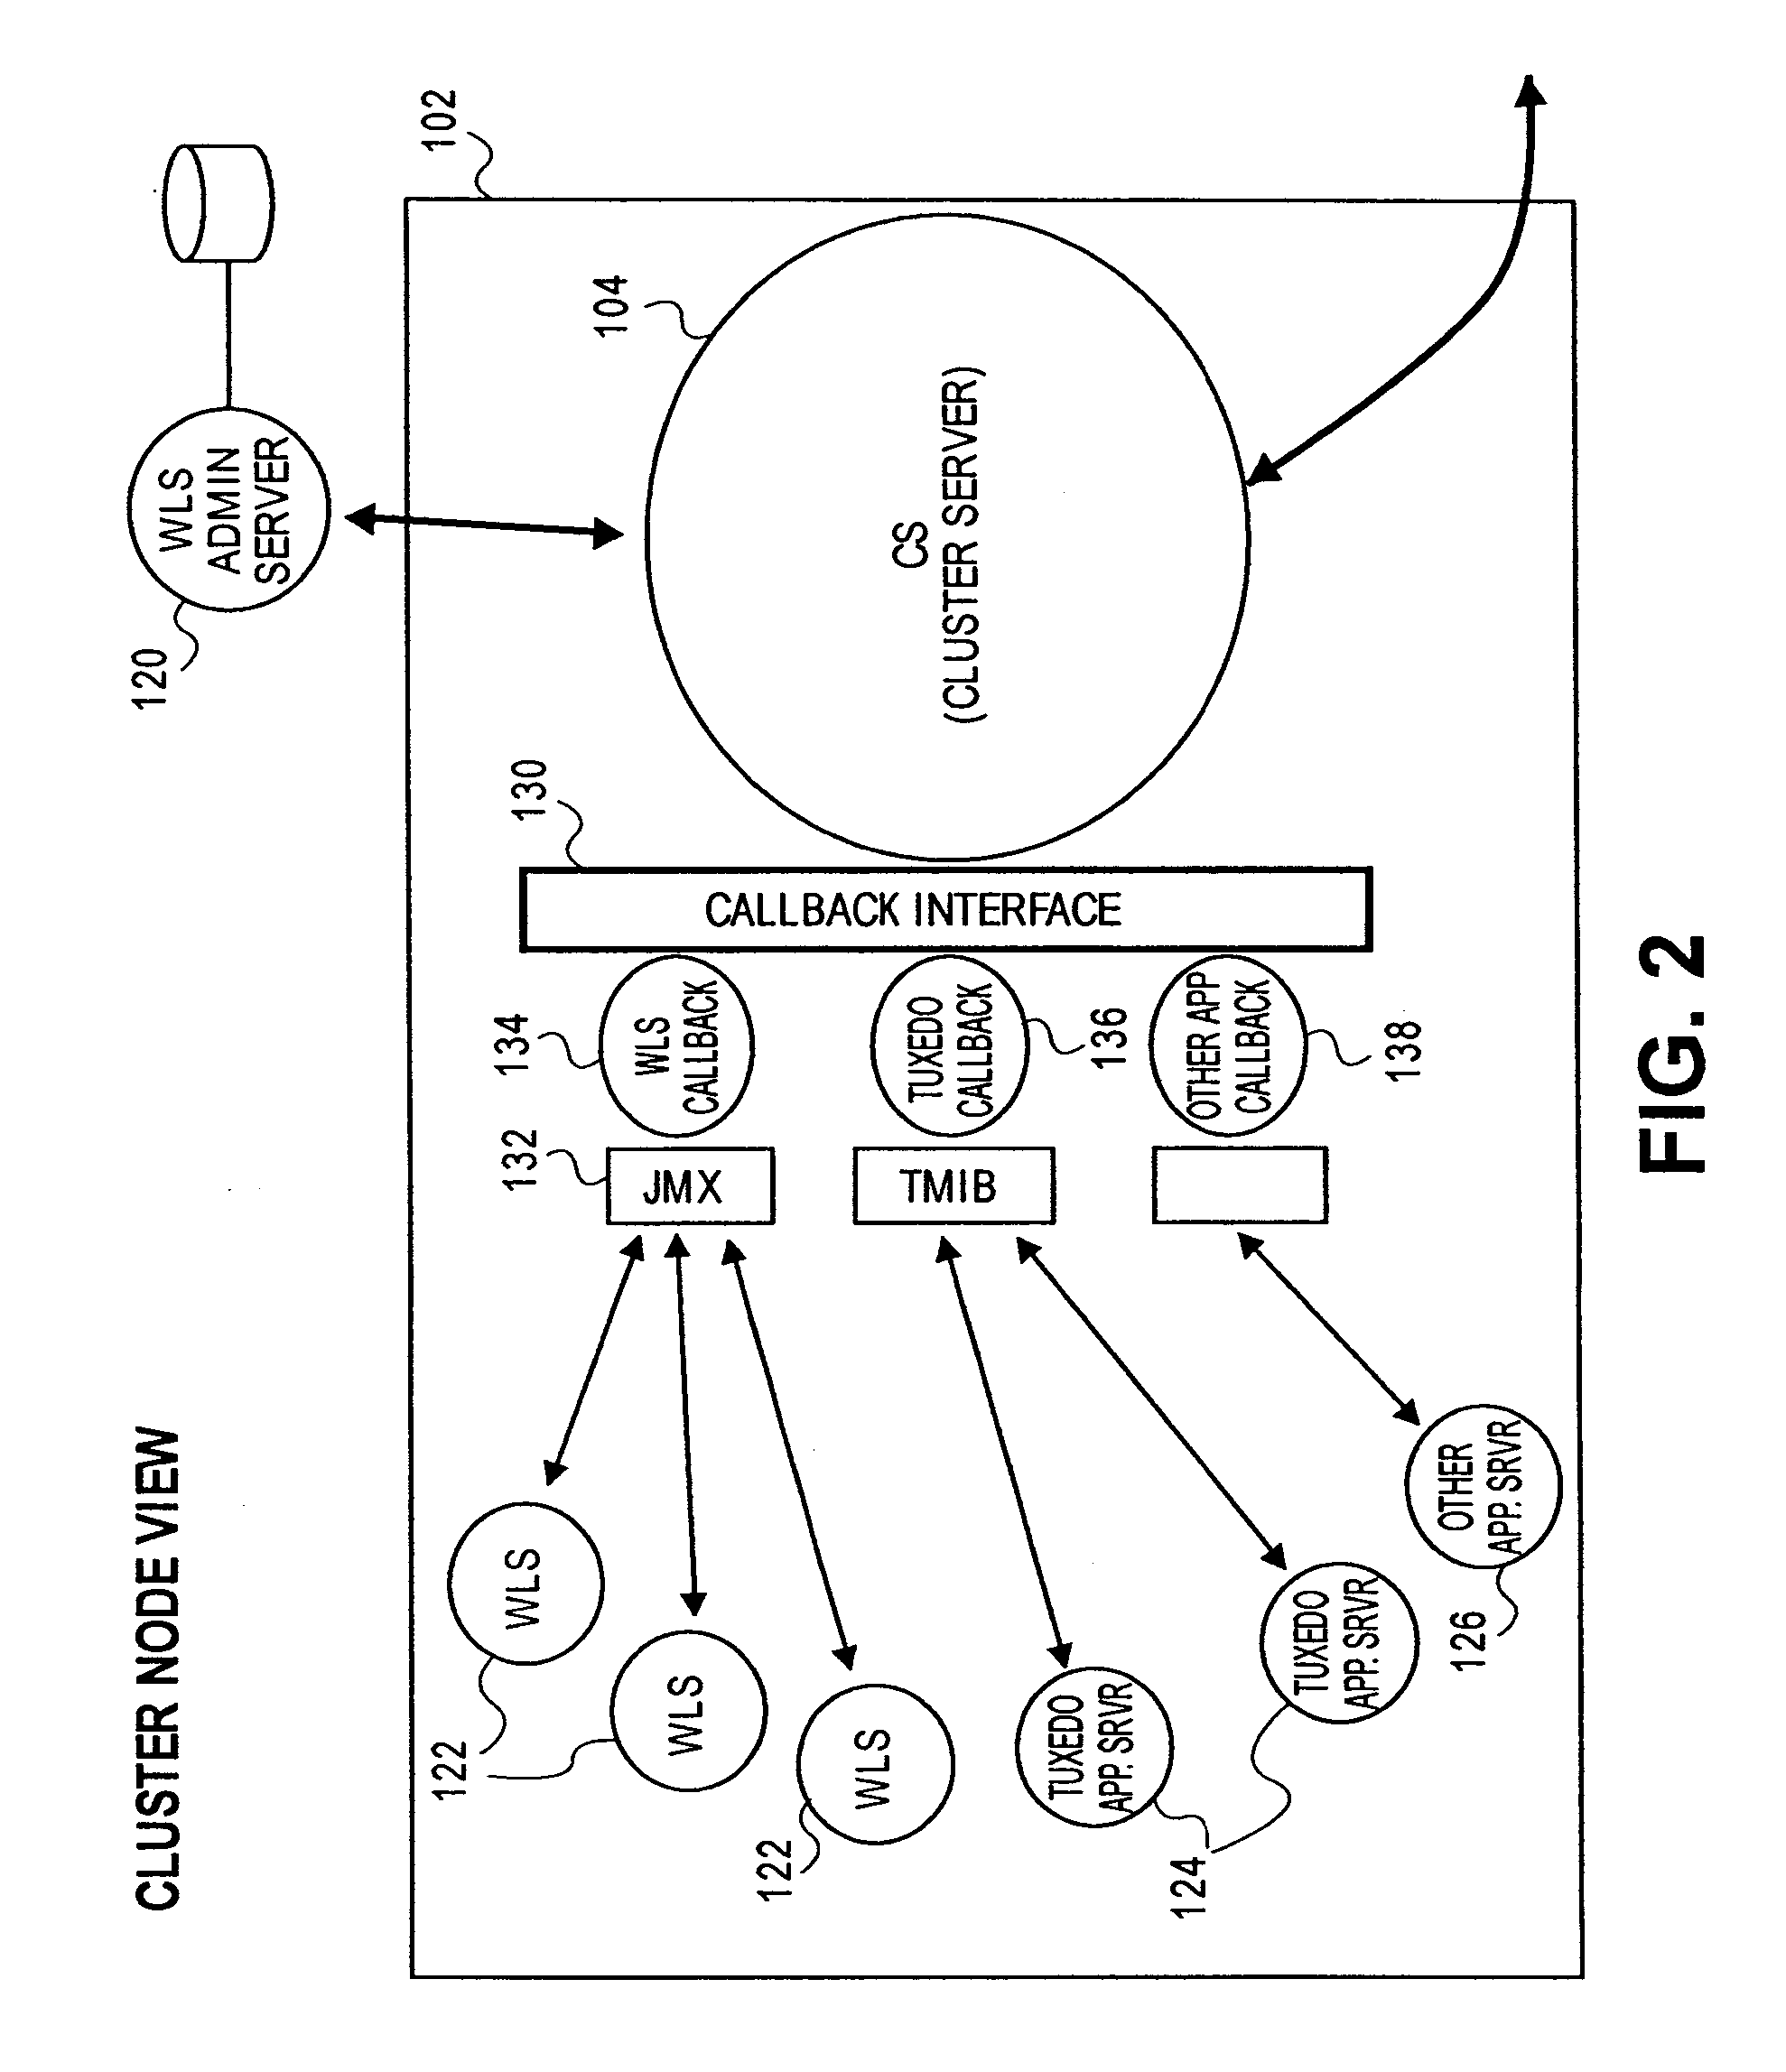 System and method for providing JAVA based high availability clustering framework